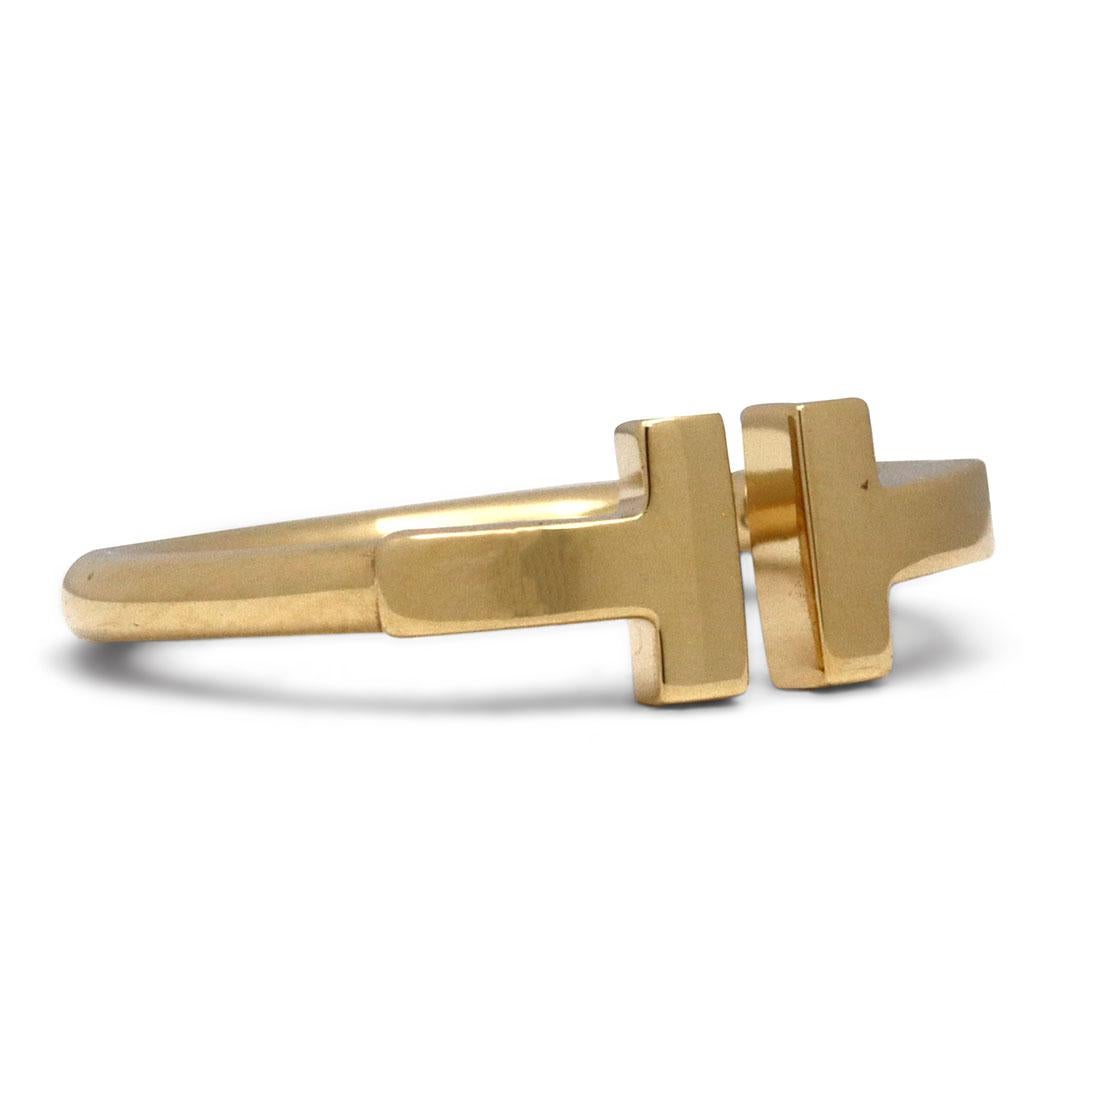 Authentic Tiffany & Co. 'Tiffany T Wire' ring crafted in 18 karat yellow gold. This stunning ring features a bold 